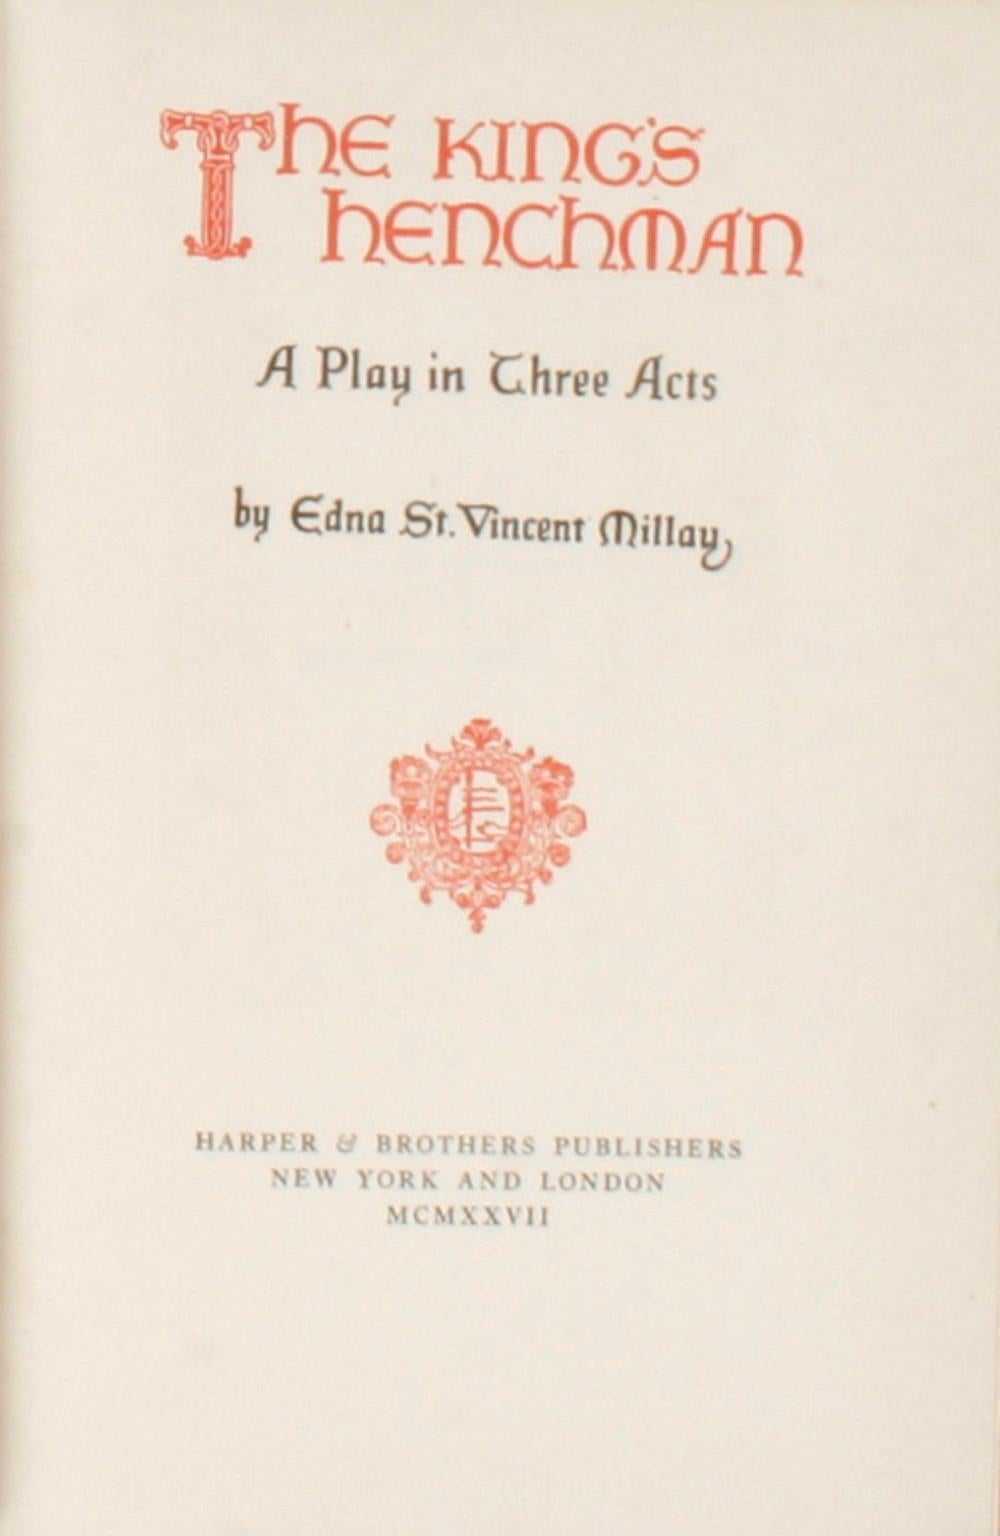 American The King's Henchman by Edna St. Vincent Millay, A Play in Three Acts, 1st Ed